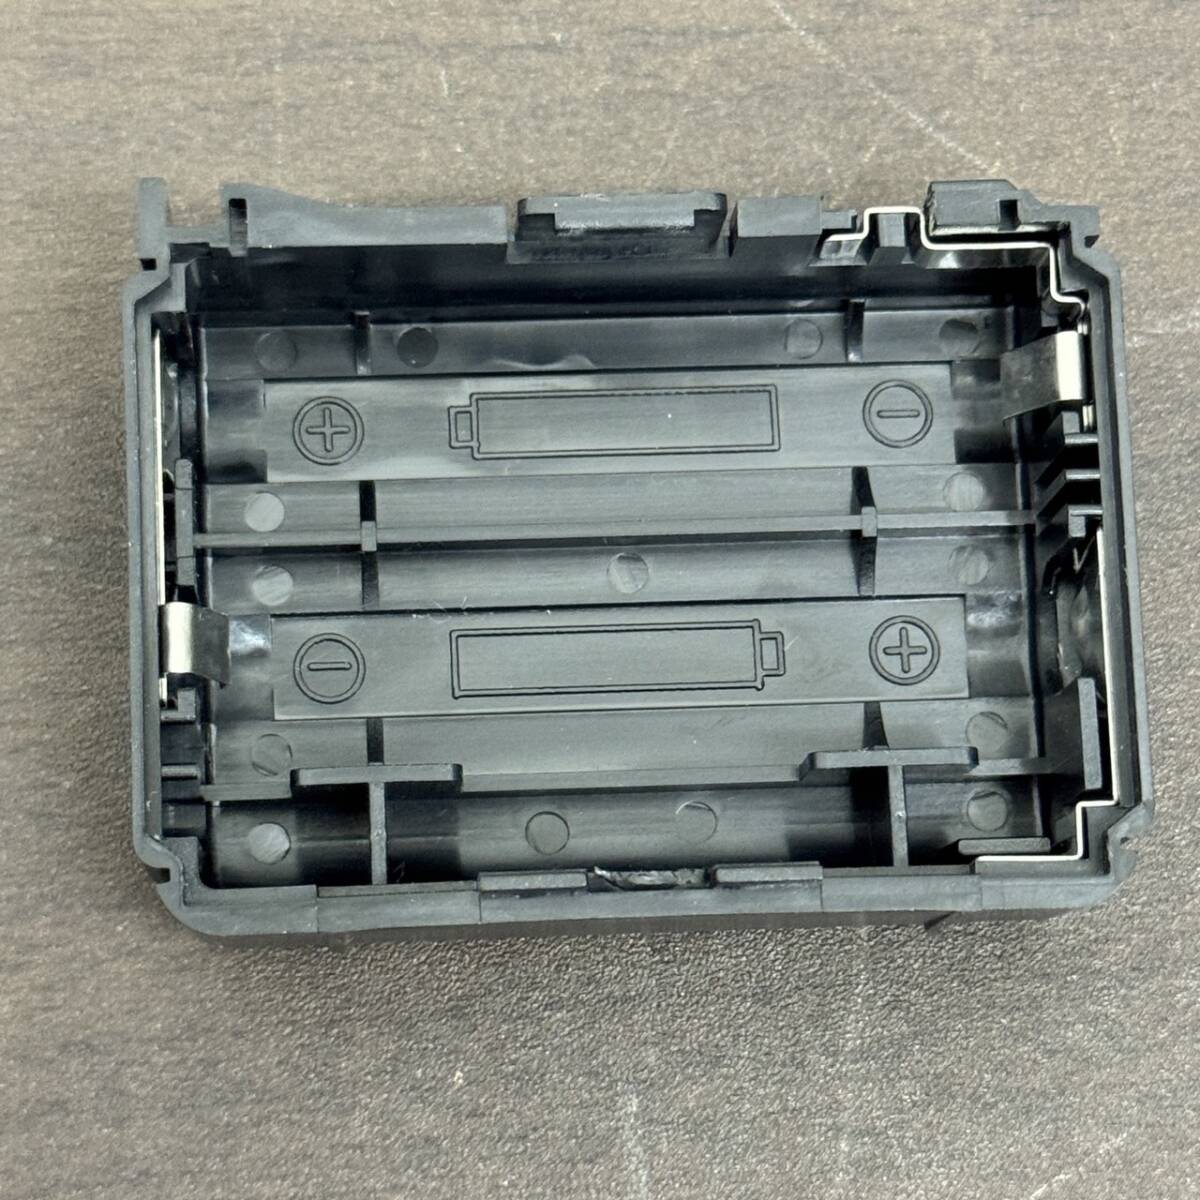  postage 580 jpy ~ present condition goods electrification has confirmed STANDARD standard BATTERY TRAY CBT150 battery tray 